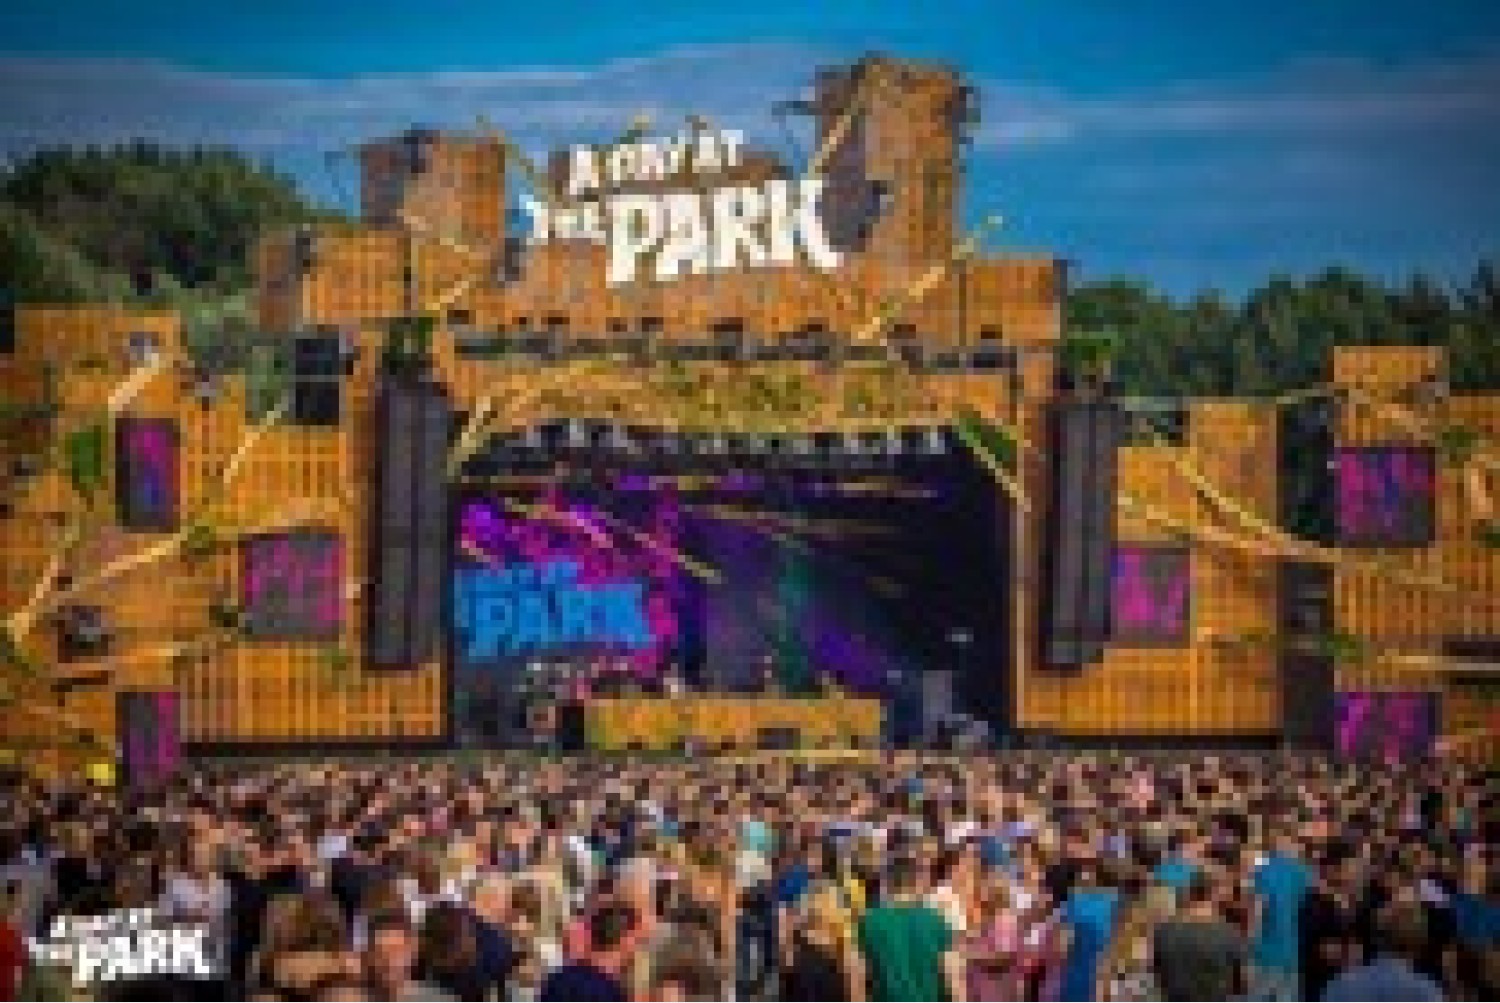 Party nieuws: A Day at the Park succesvol richting tiende editie